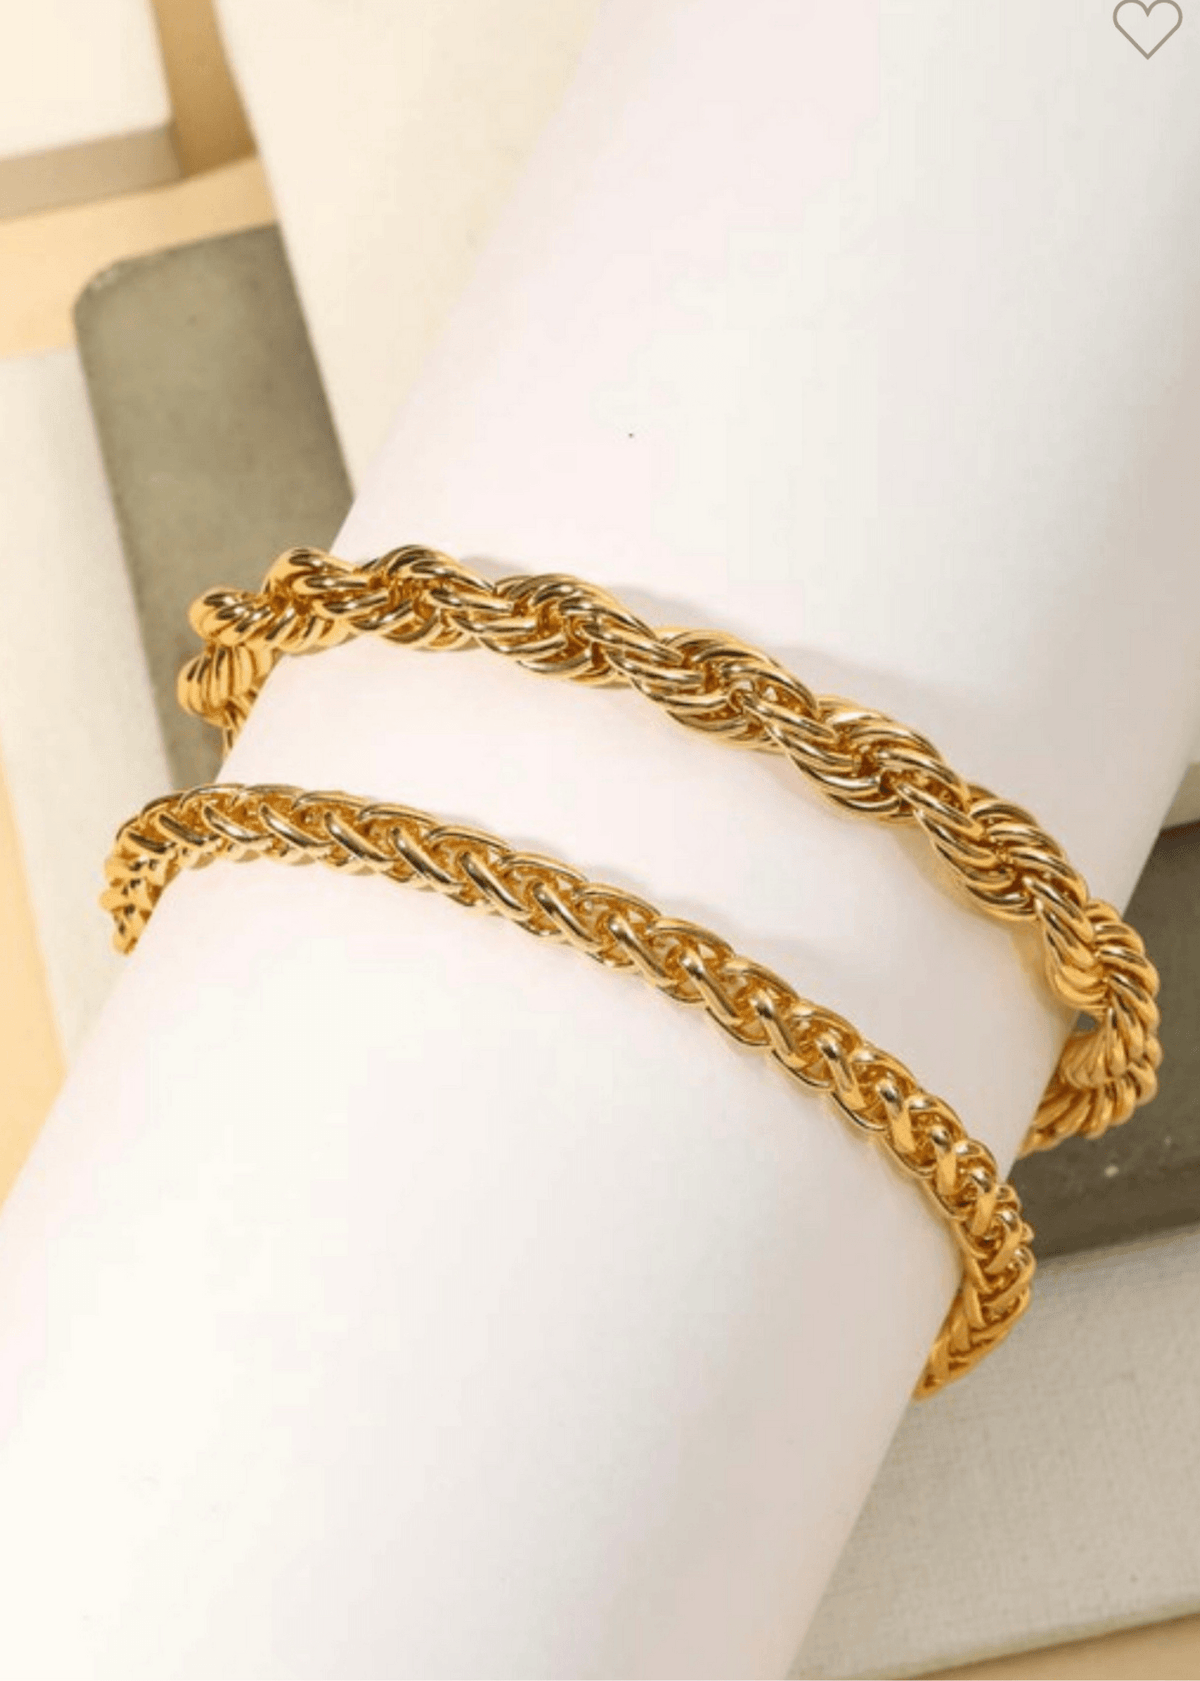 Get trendy with Rope Bracelet [set of 2] - Accessories available at ELLE TENAJ. Grab yours for $10 today!